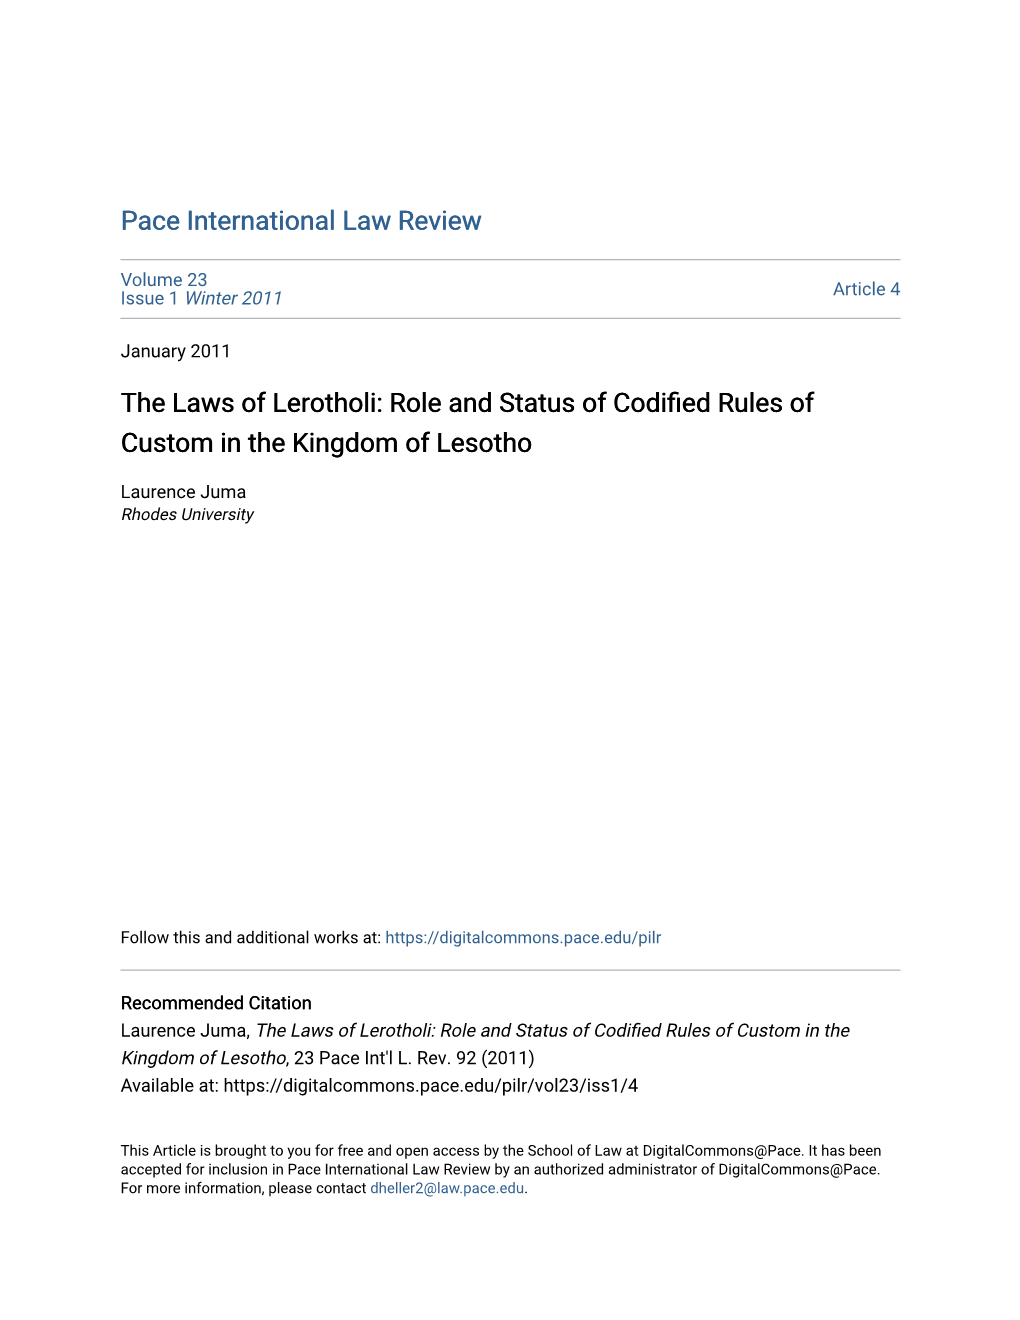 The Laws of Lerotholi: Role and Status of Codified Rules of Custom in the Kingdom of Lesotho